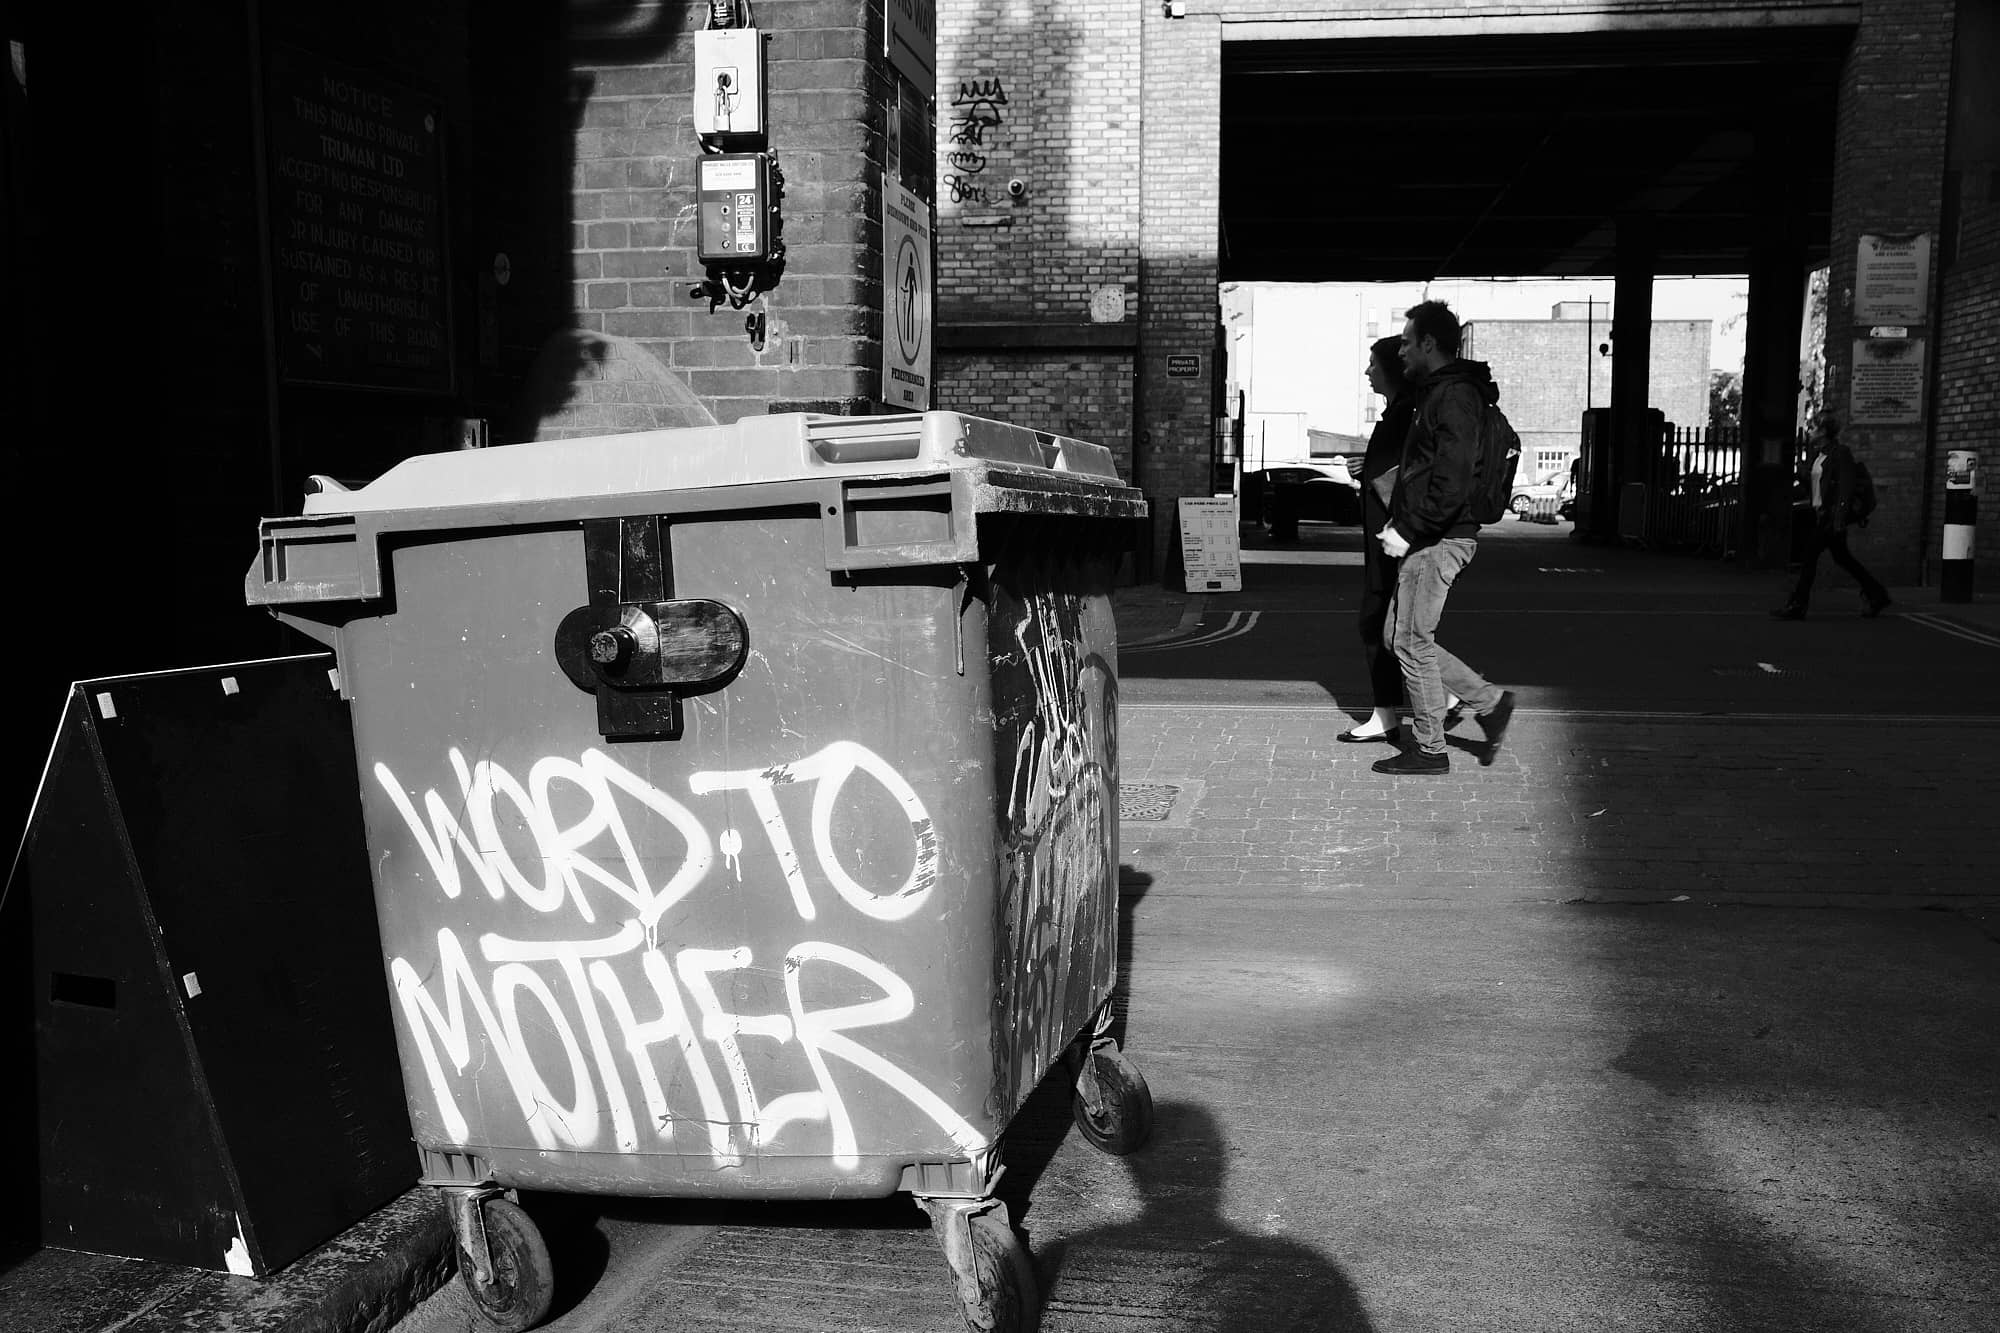 bin with ‘Word To Mother’ sprayed on it